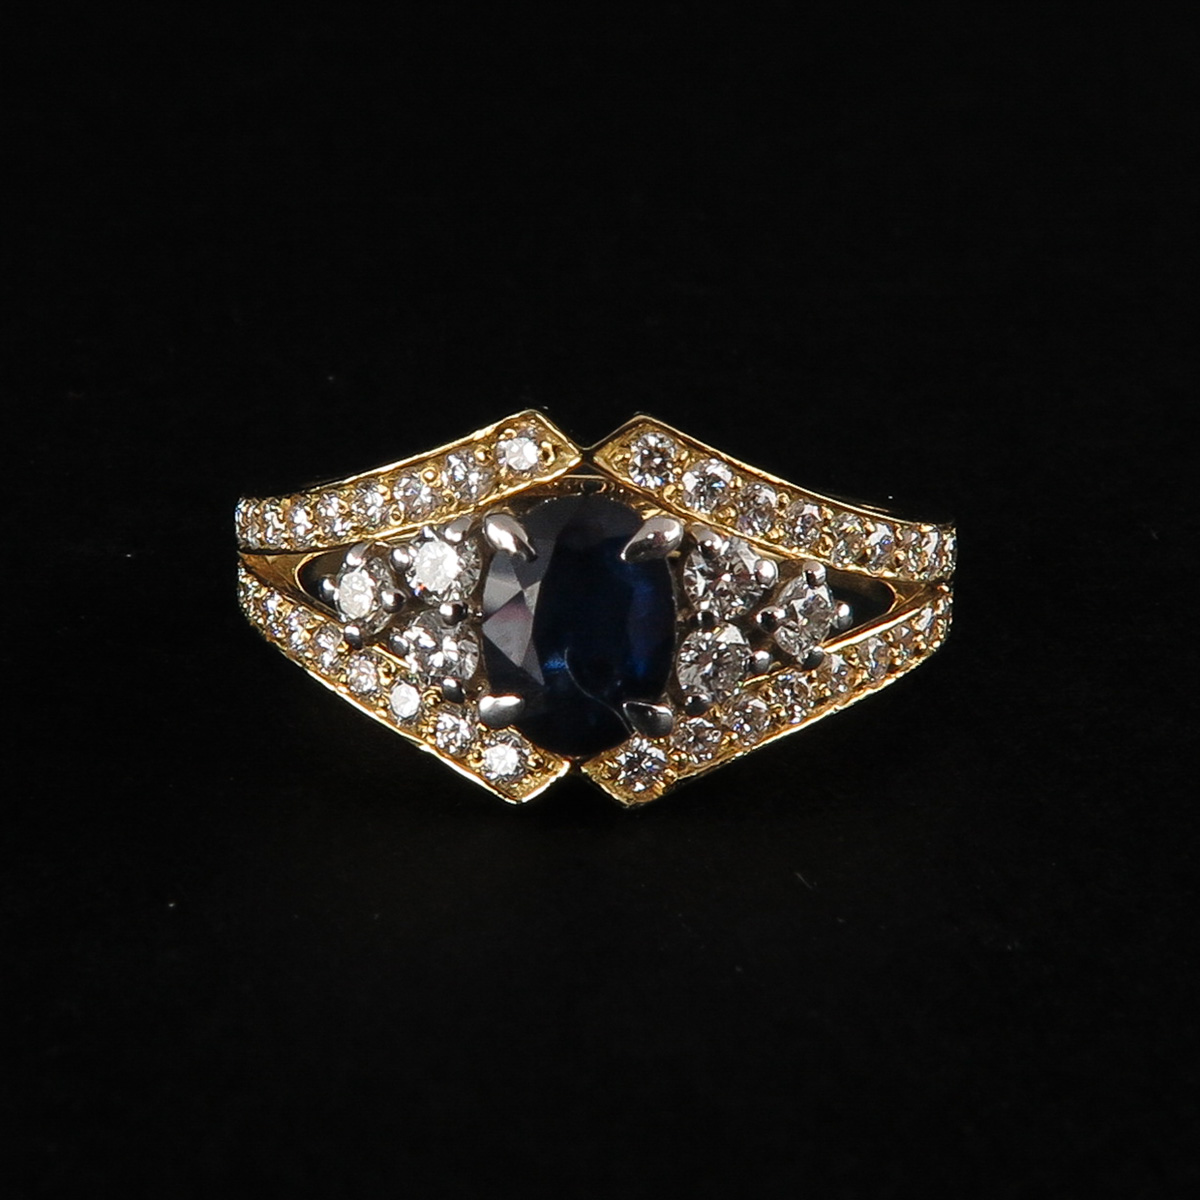 A Ladies Diamond and Sapphire Ring - Image 2 of 5